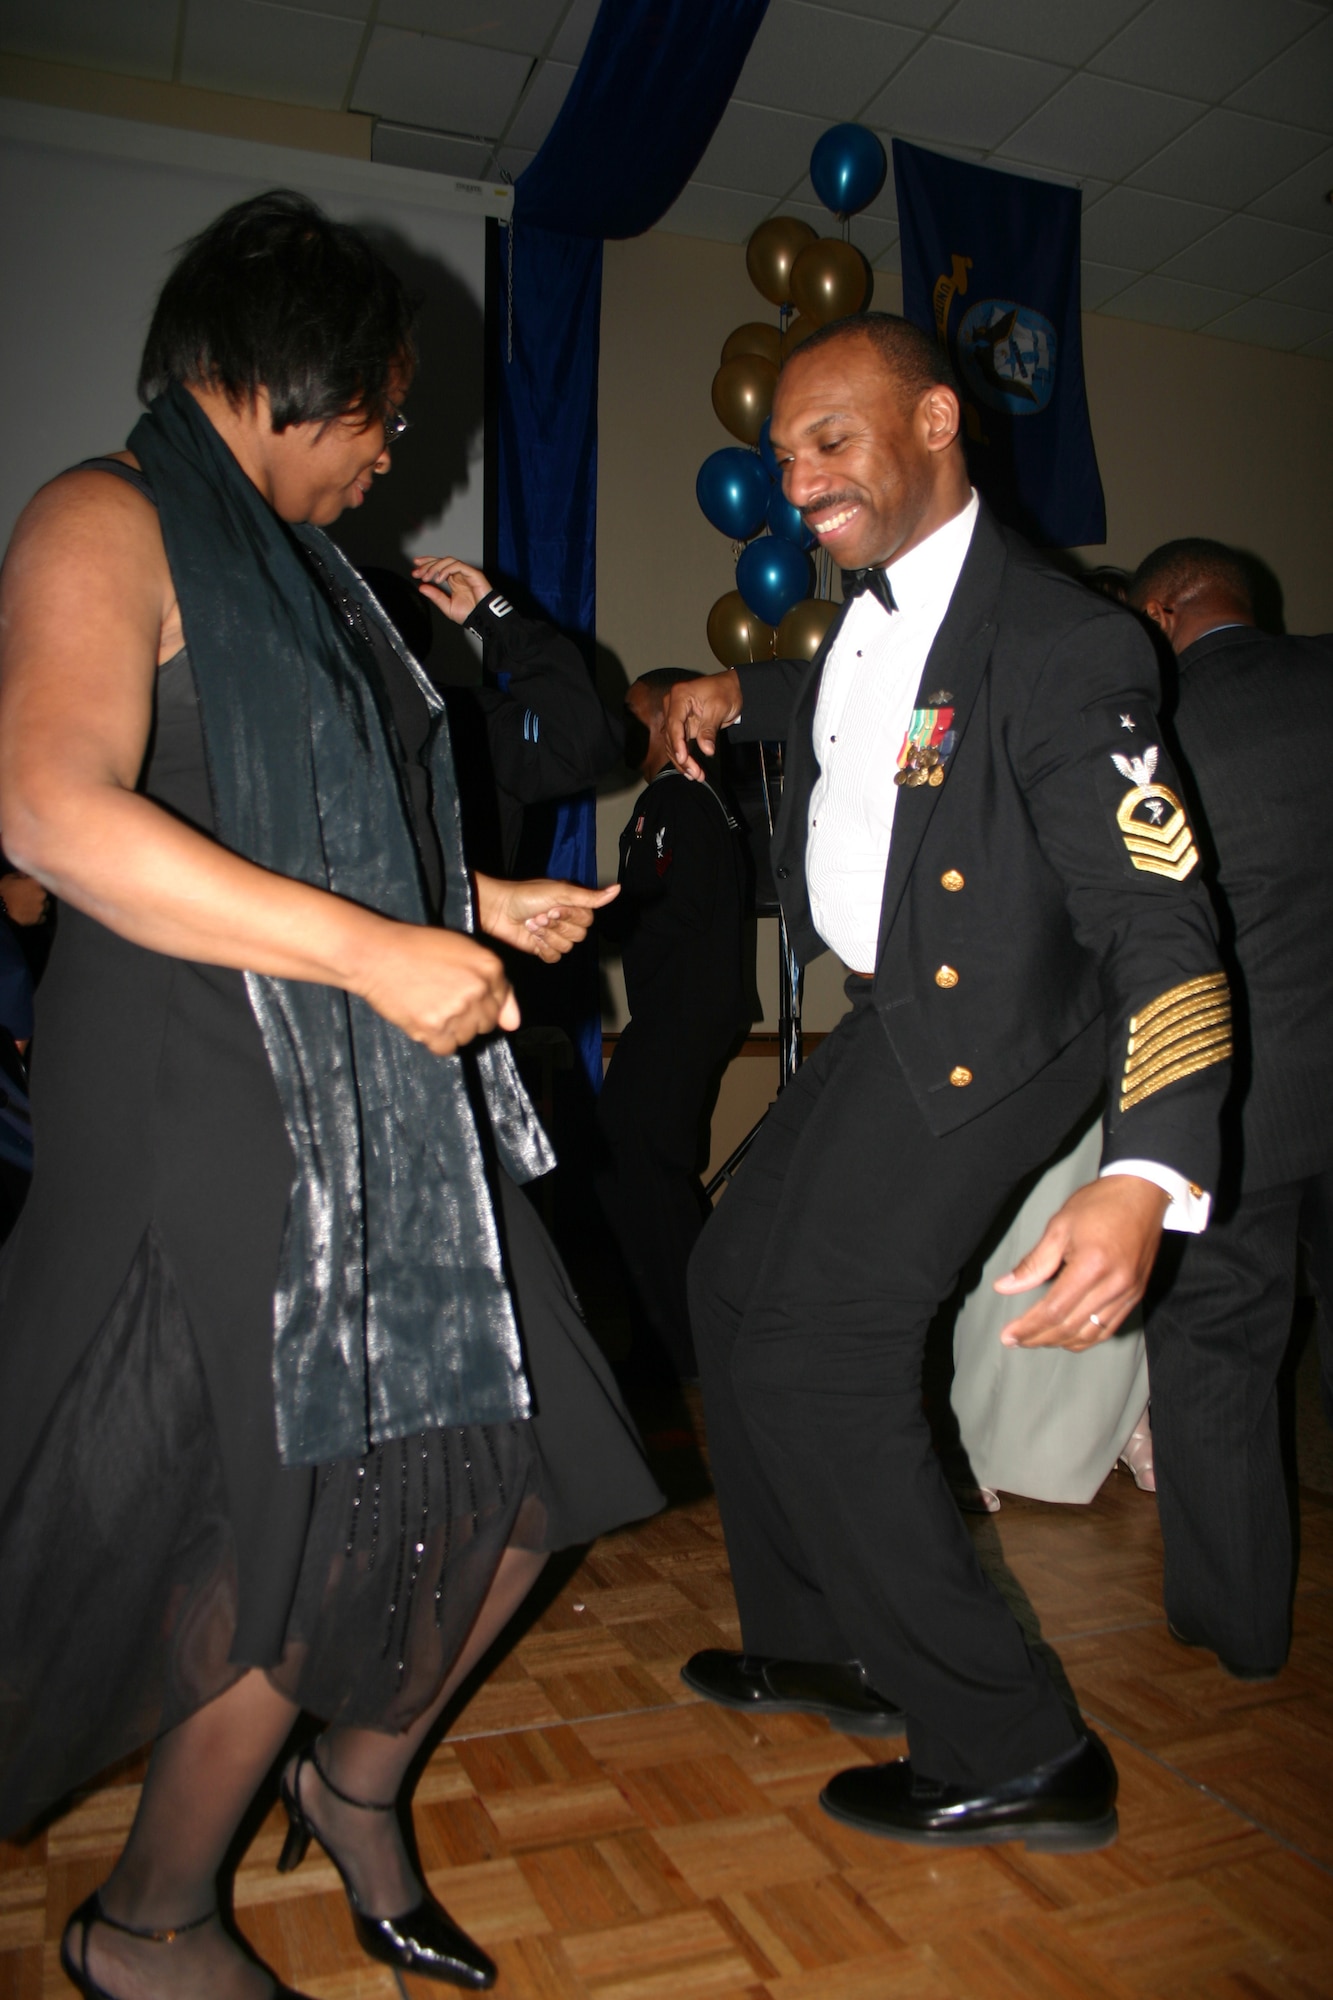 Navy Senior Chief Petty Officer Todd Bolden takes a spin on the dance floor with his sister, Sandra Bolden, during the Seabees Ball at the Howard Johnson Plaza Hotel March 3. (U.S. Air Force photo/Staff Sgt. Tonnette Thompson)